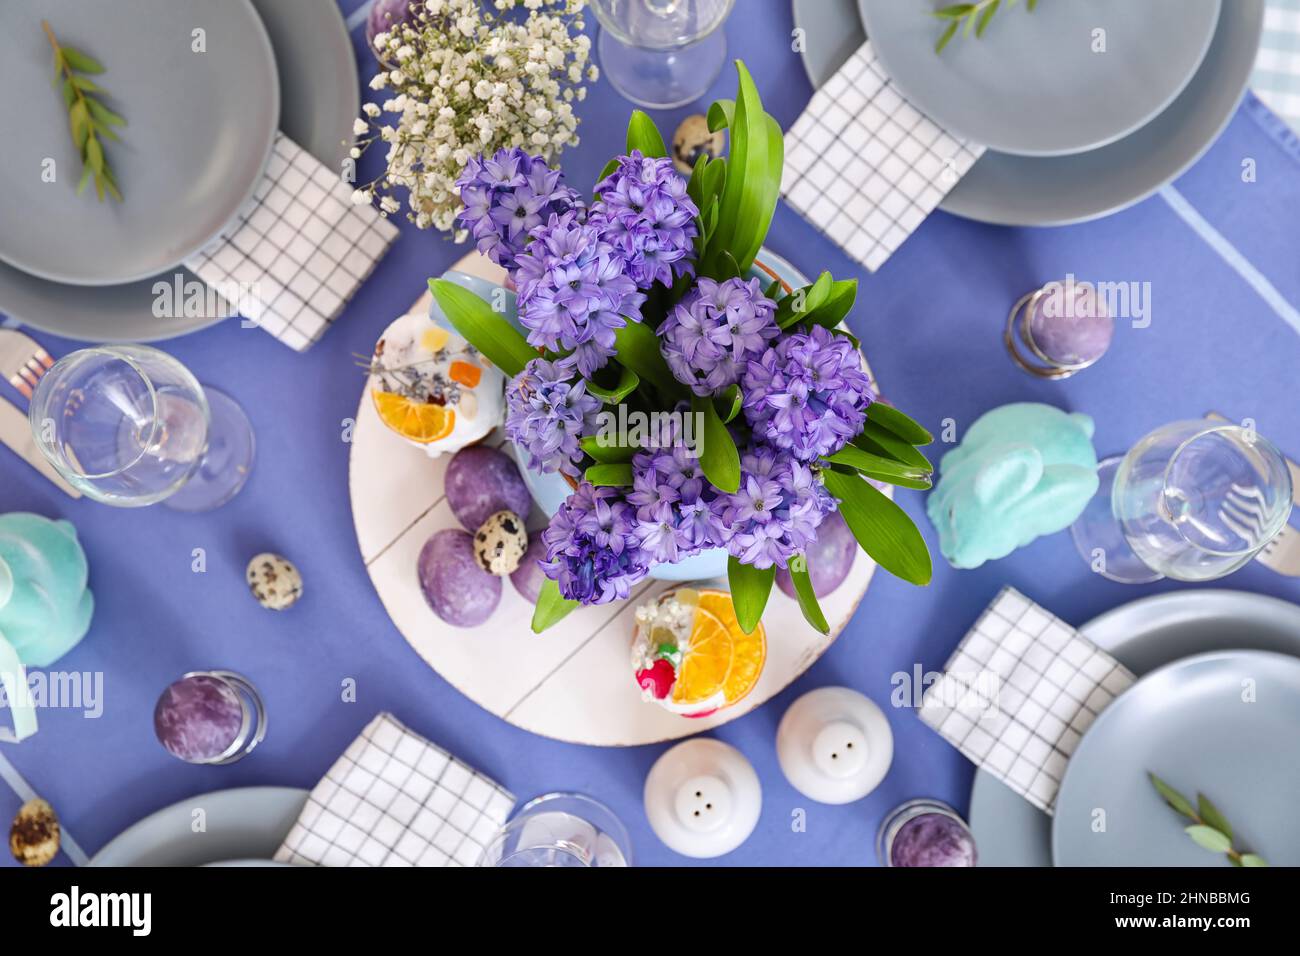 Vase with beautiful flowers, Easter cakes and eggs on served table Stock Photo